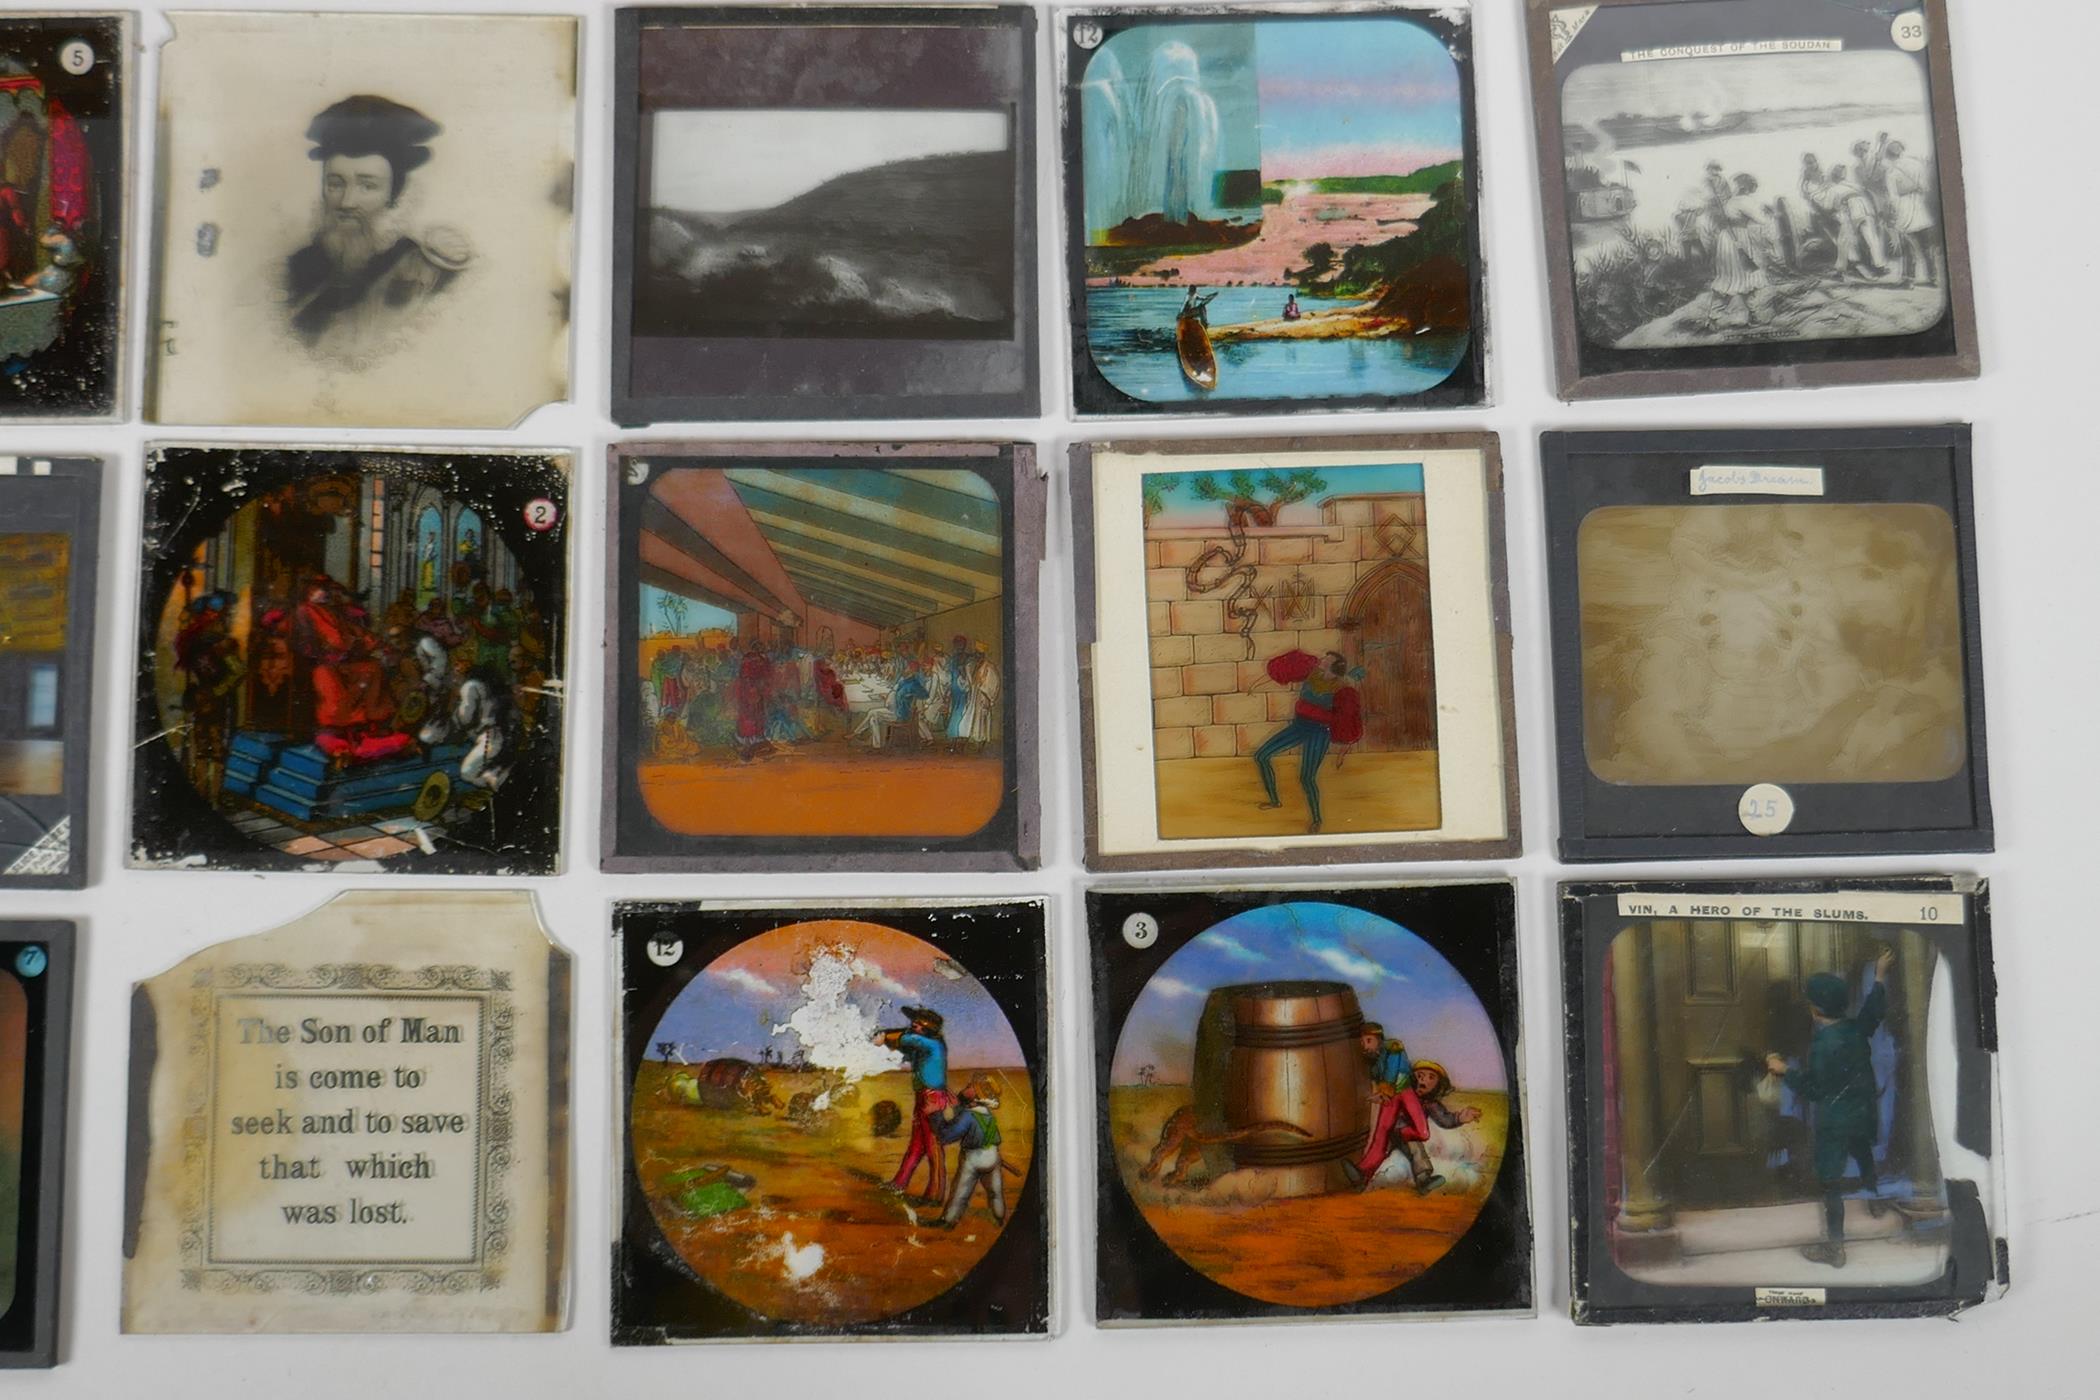 A quantity of antique assorted magic lantern slides depicting the Conquest of the Sudan, religious - Image 4 of 7